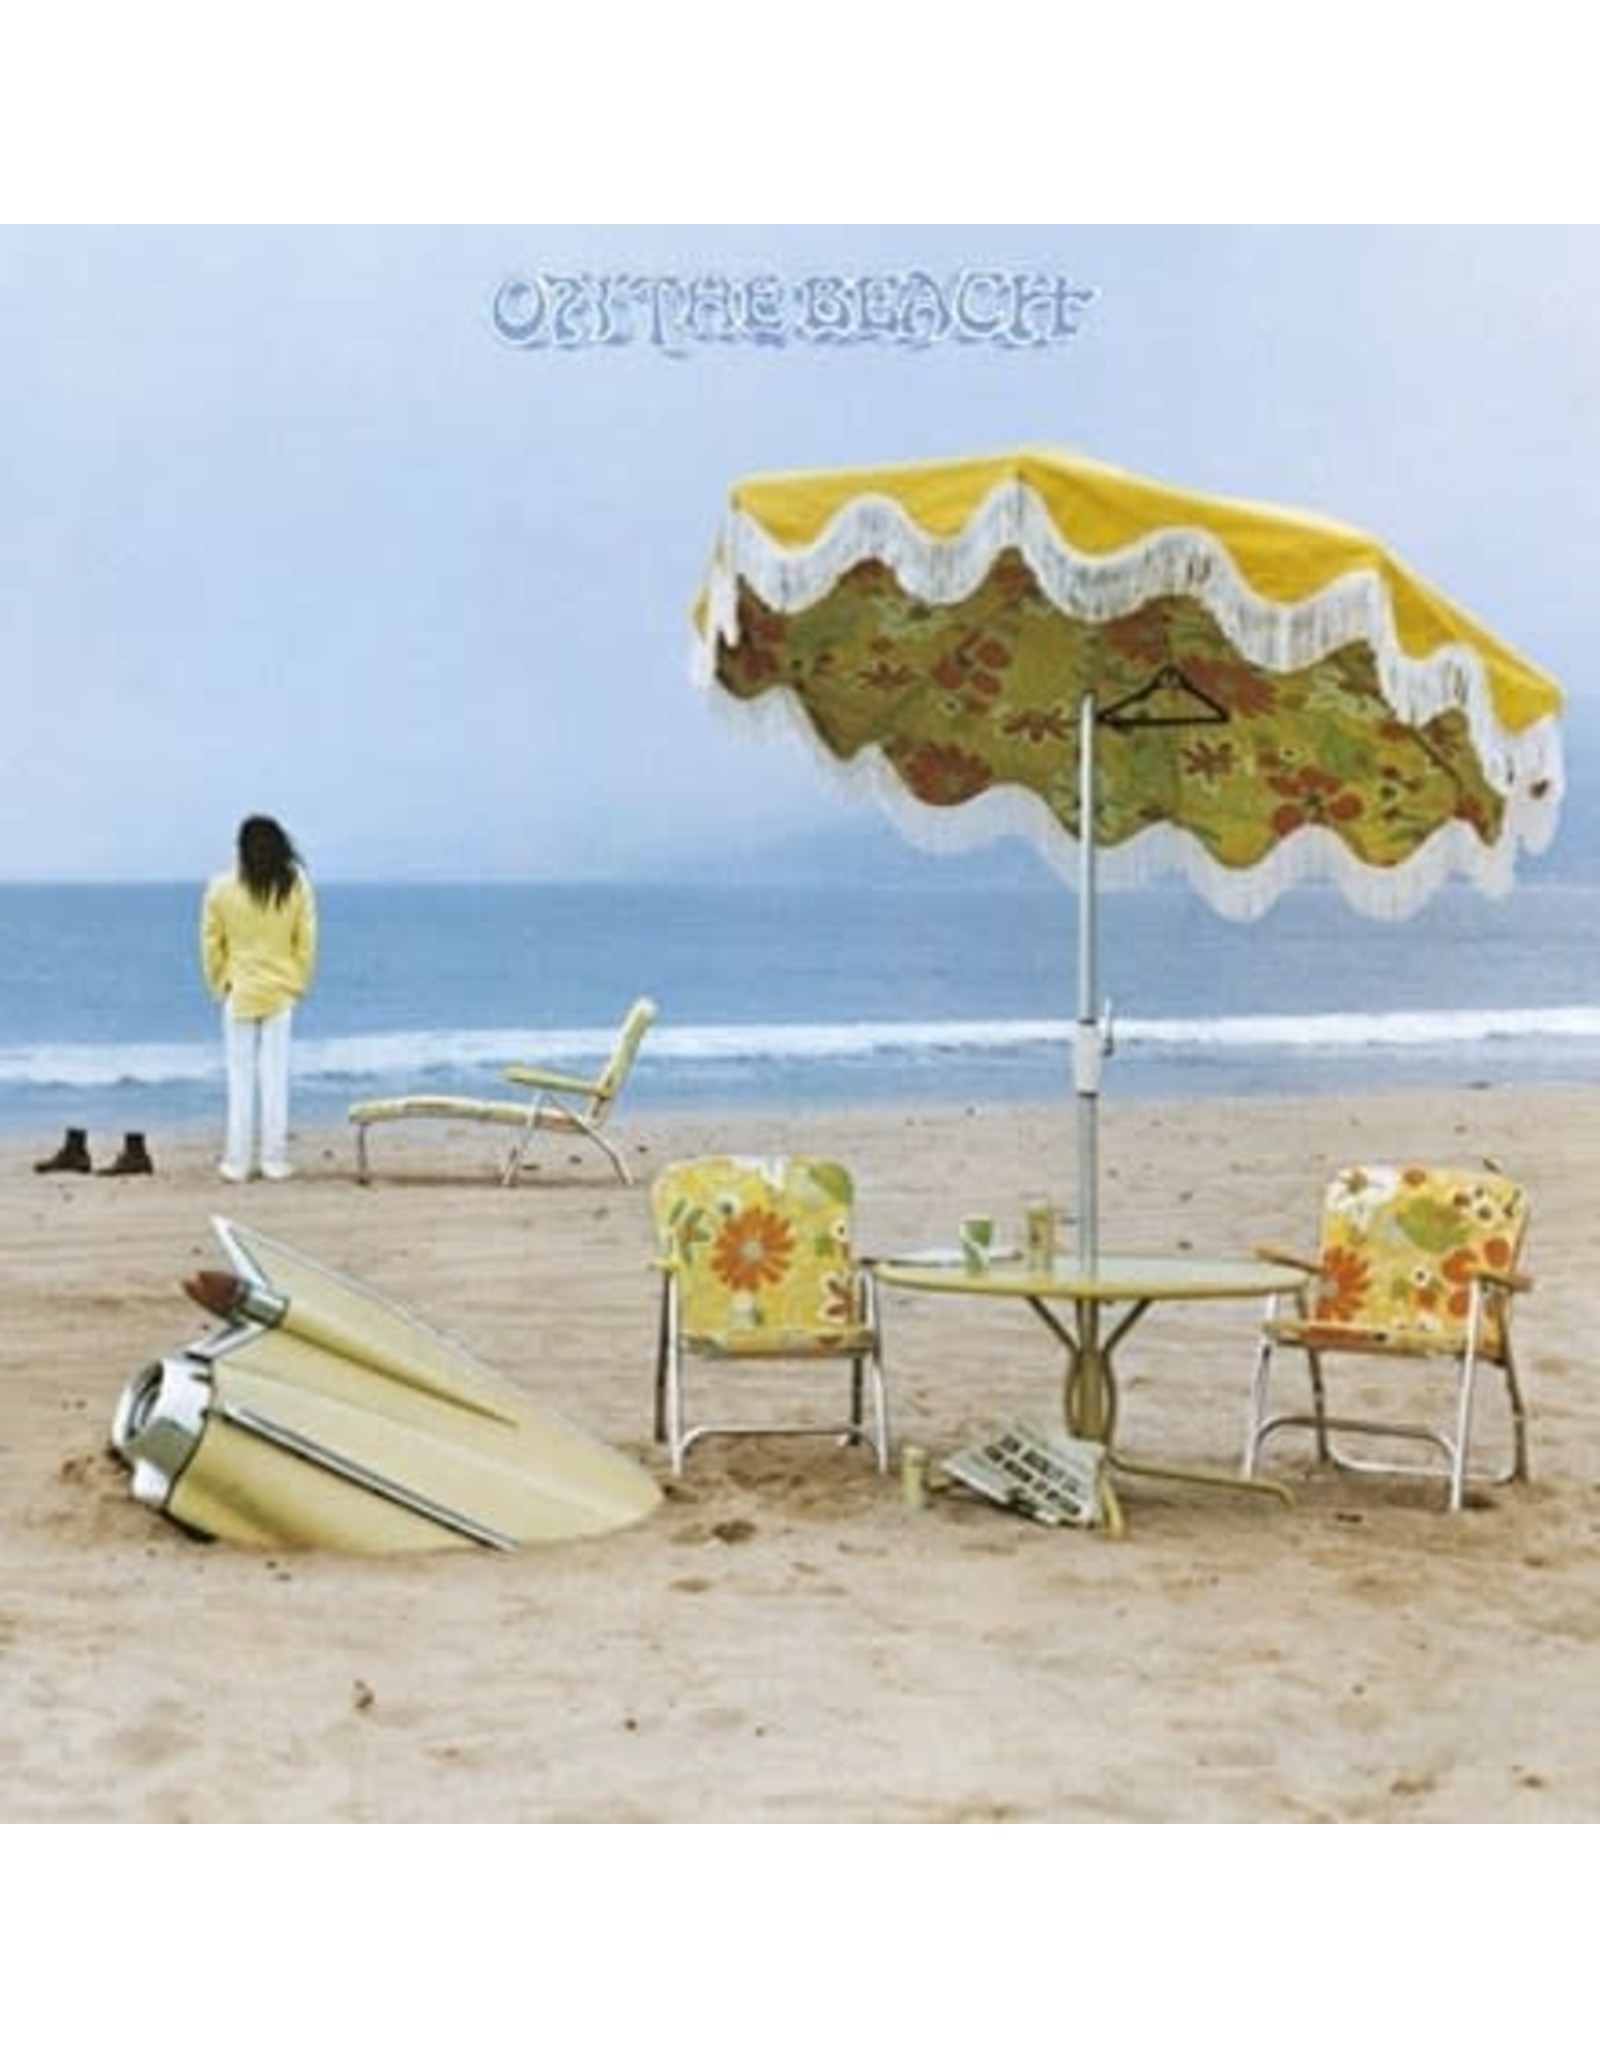 Reprise Young, Neil: On the Beach LP